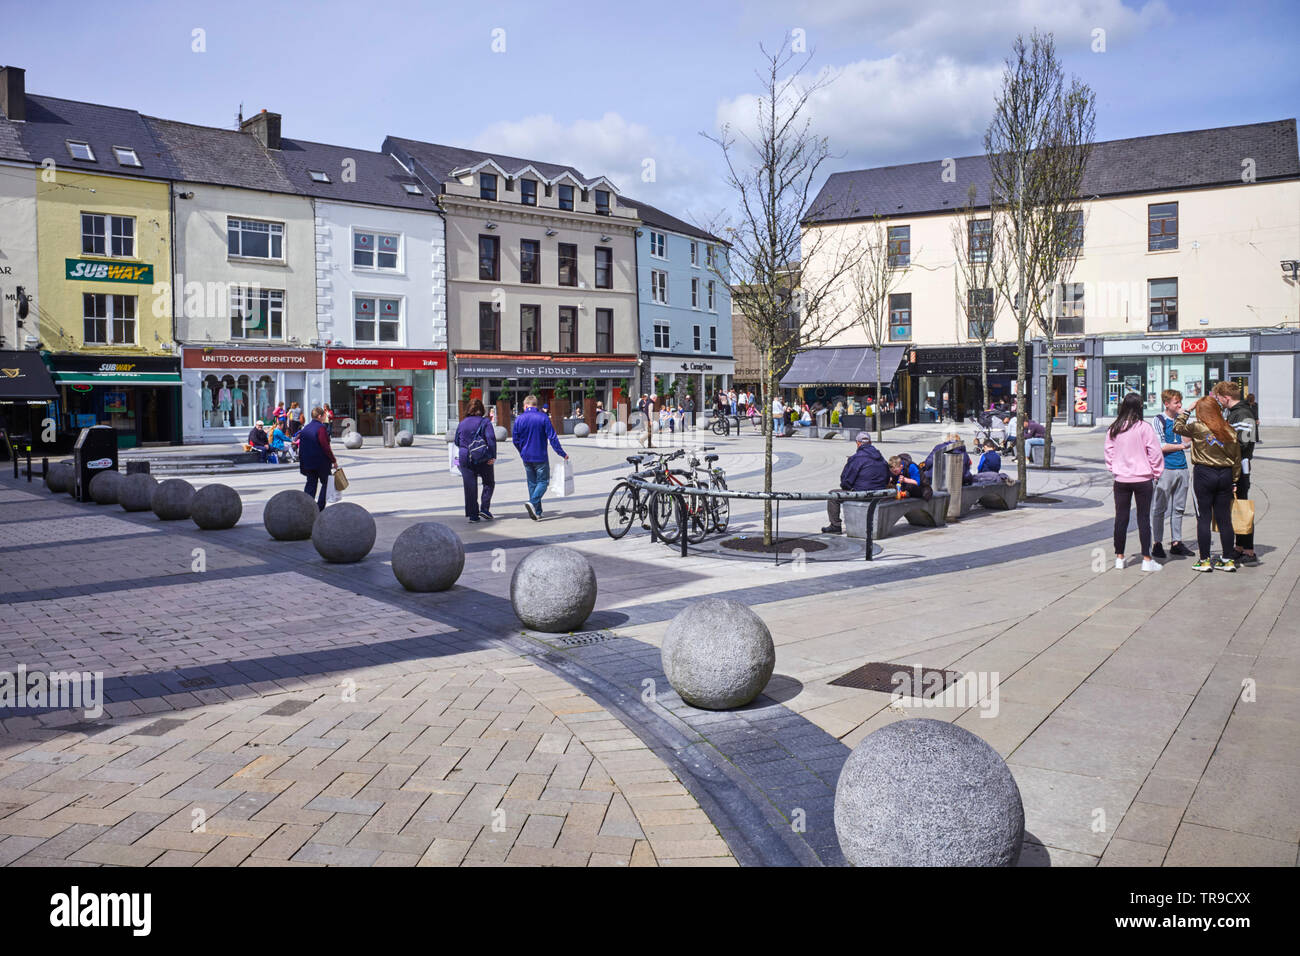 The Square in Tralee, Ireland Stock Photo